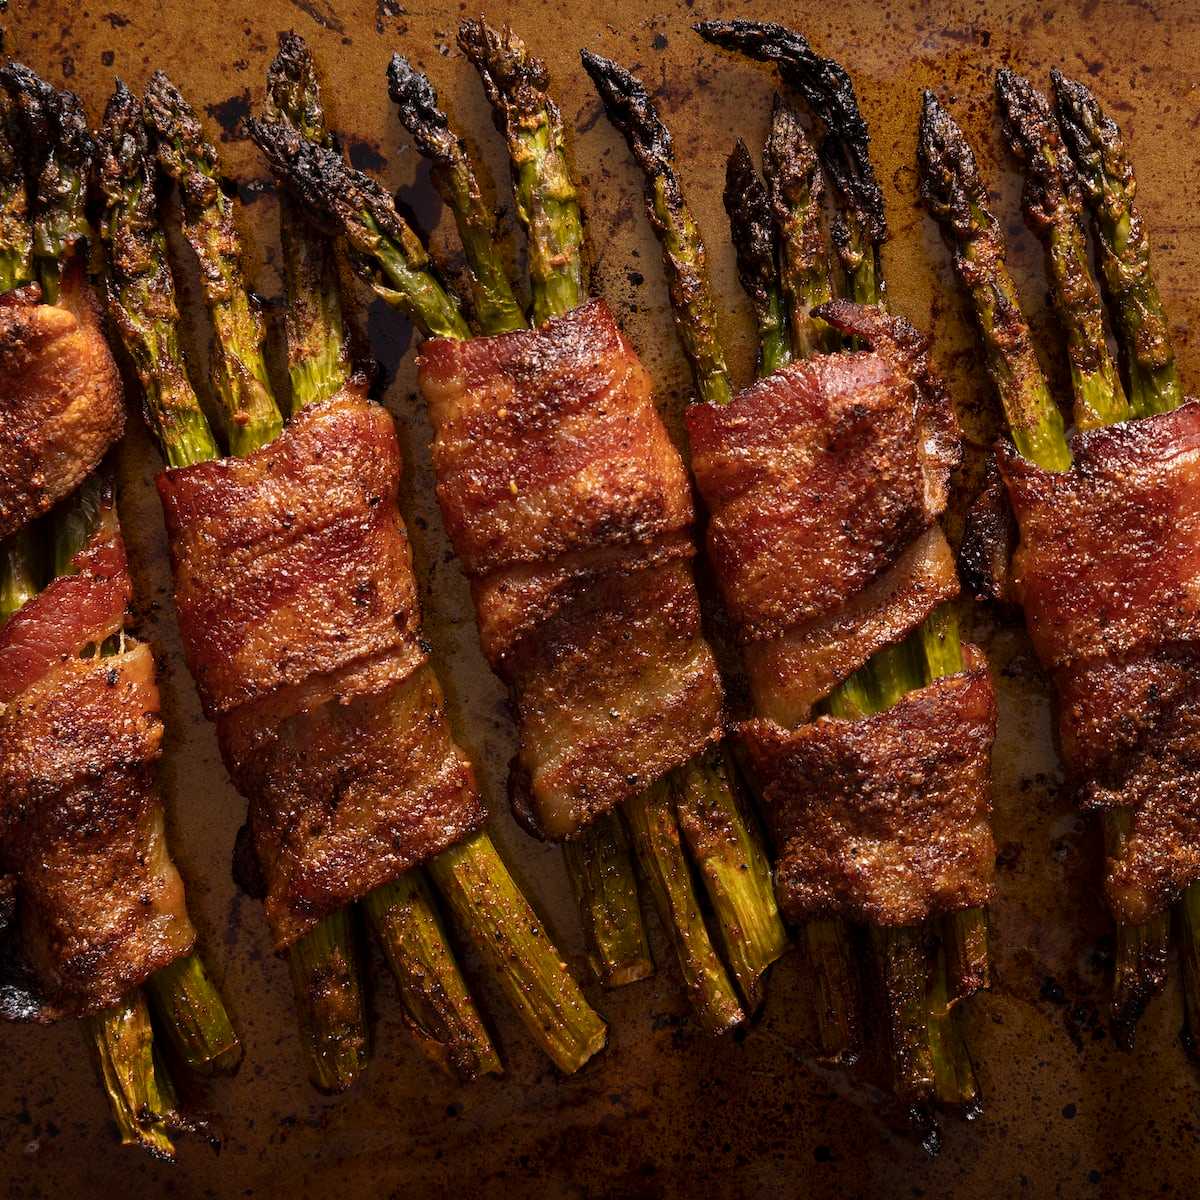 Grilled asparagus wrapped in bacon